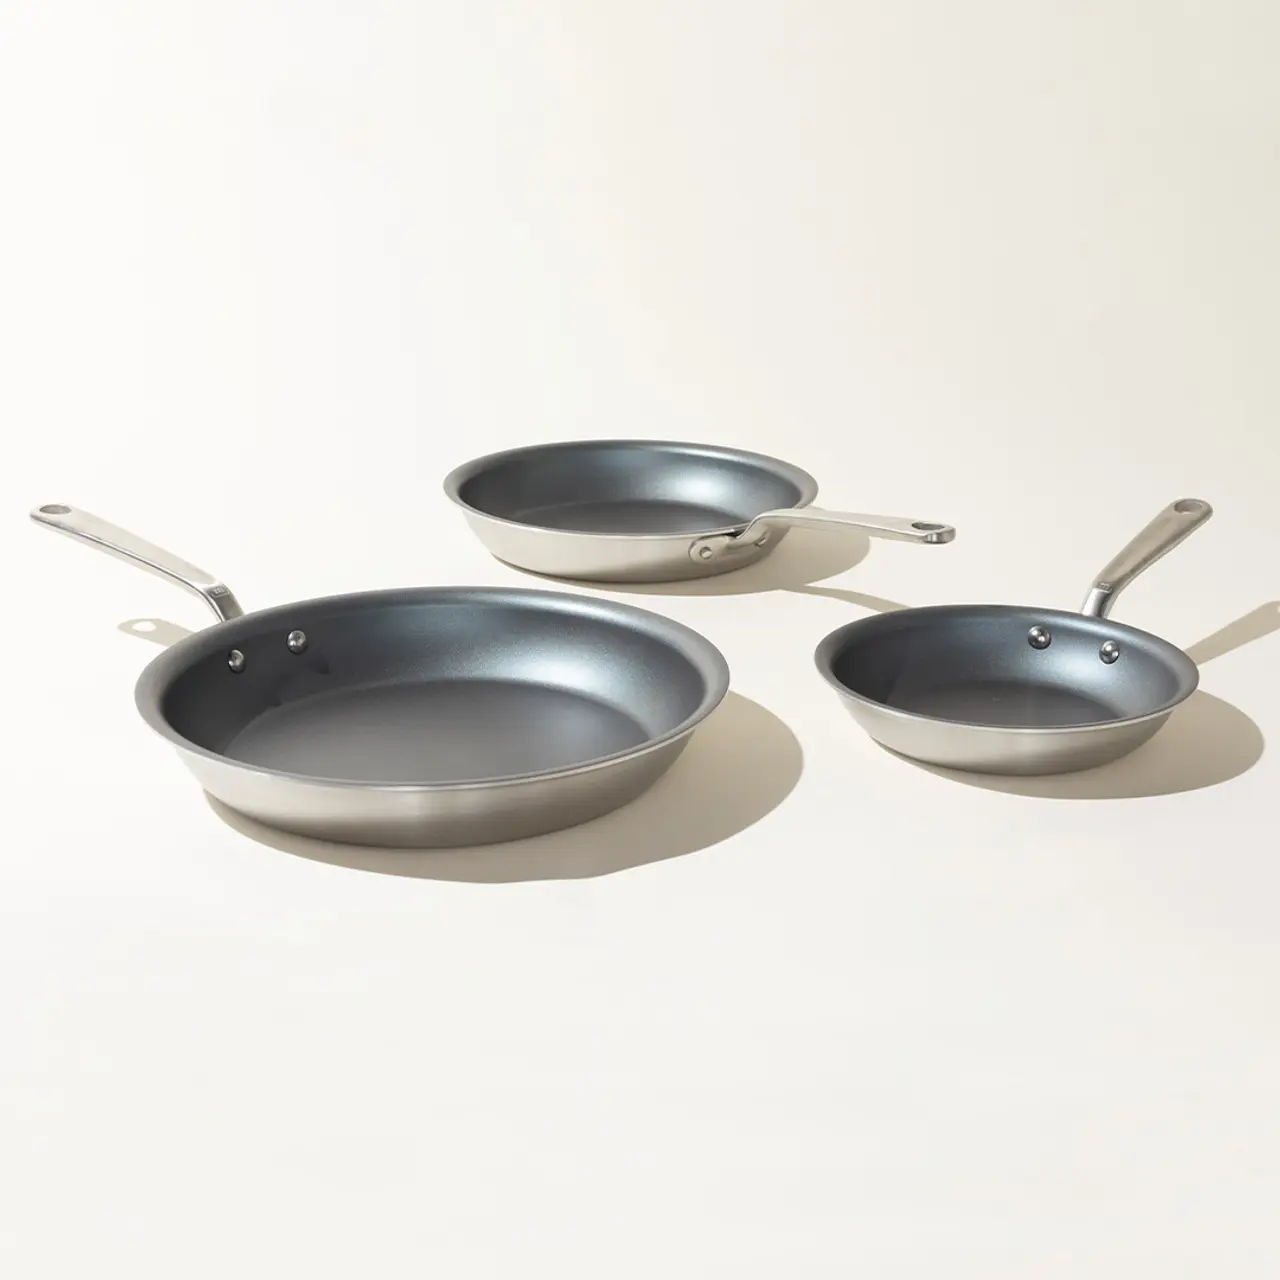 Three different sized non-stick frying pans are arranged in ascending order on a light background.